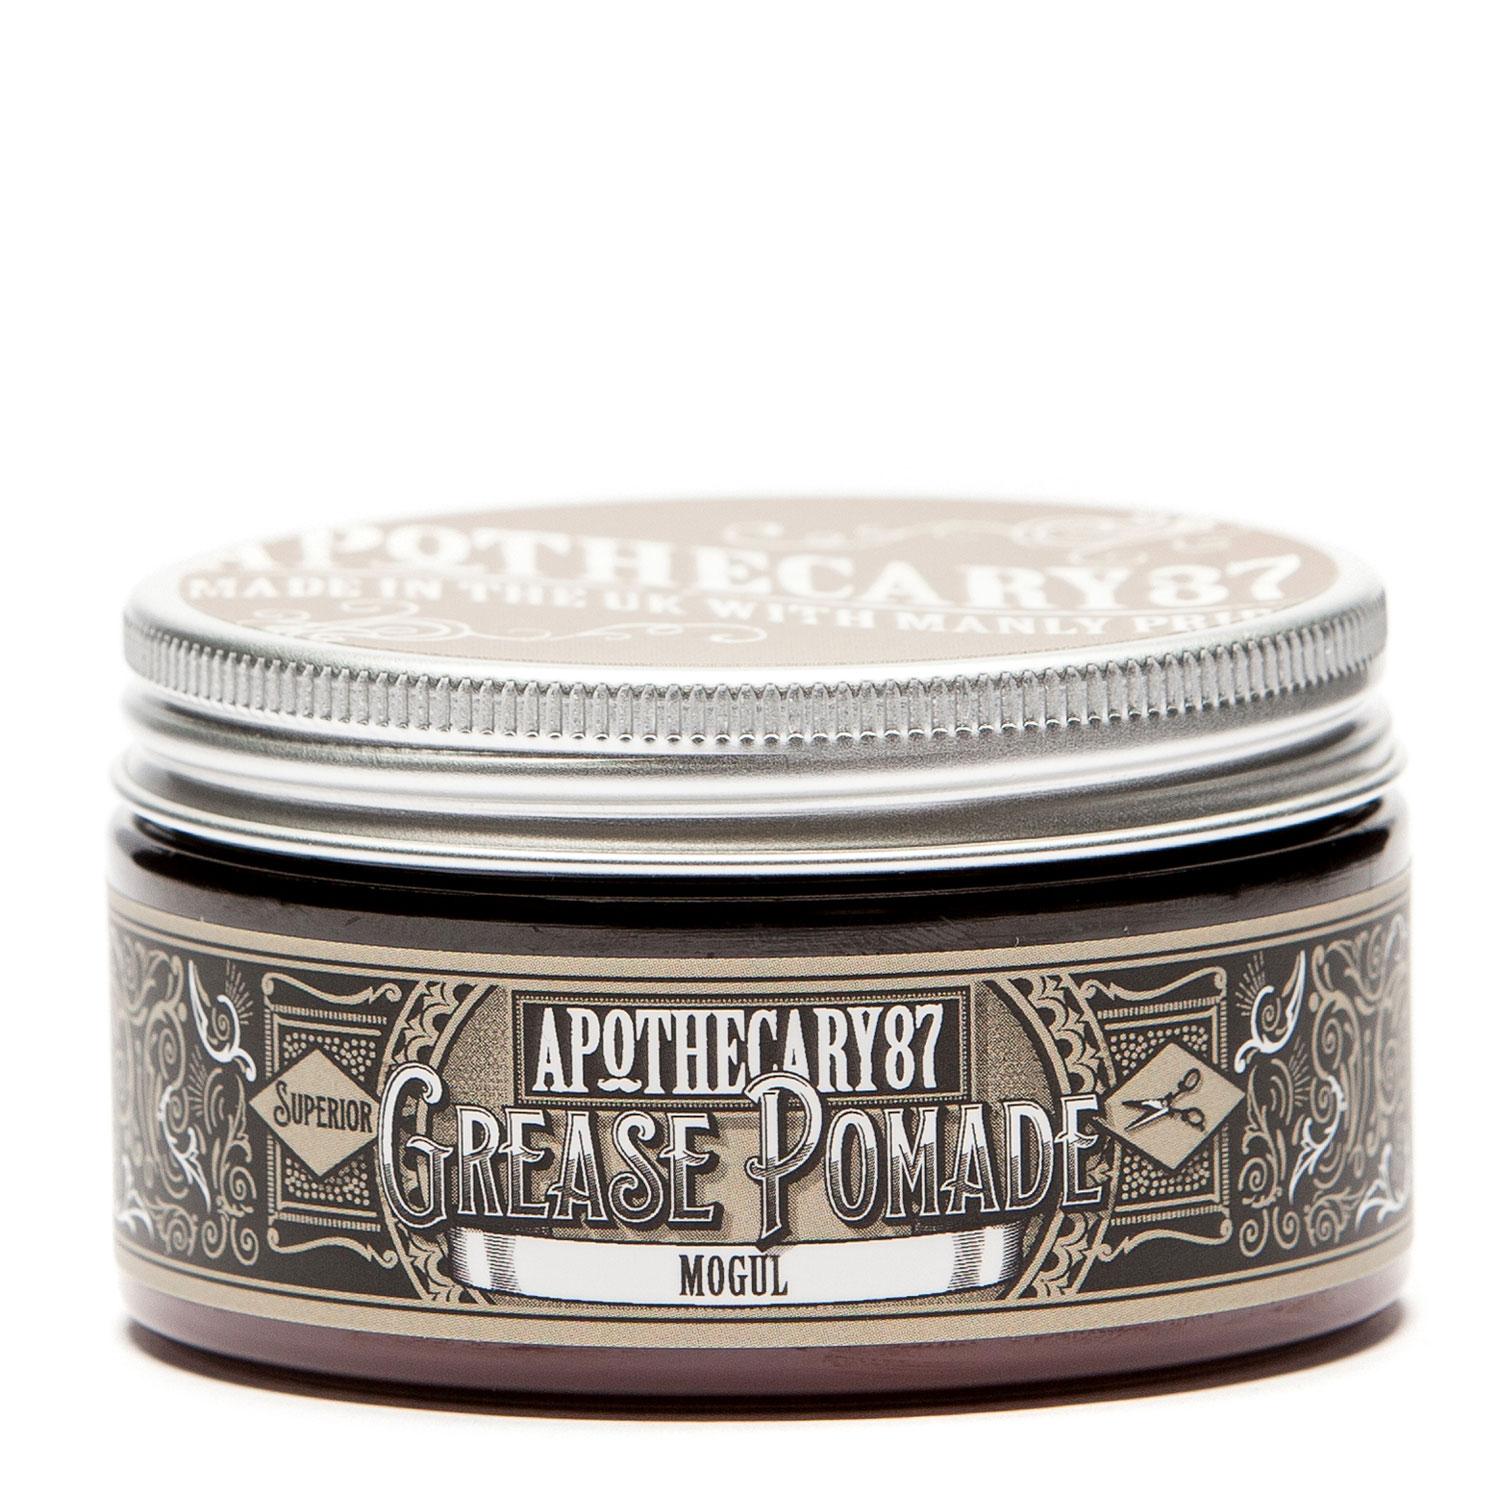 Apothecary87 Grooming - Grease Pomade Mogul Fragrance